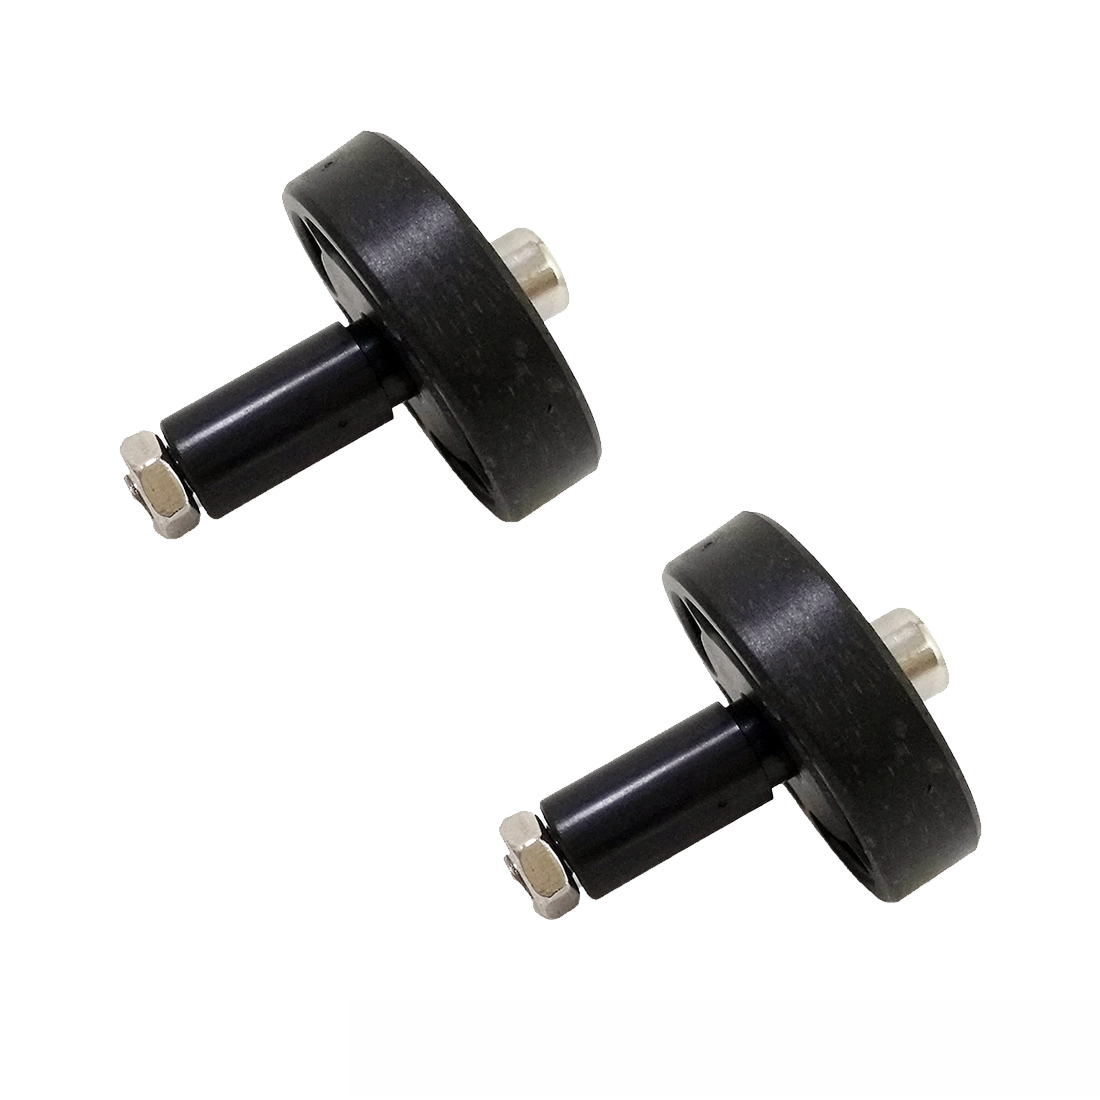 2Pcs Black Rubber Bearing Wheels for Chassis Tank Car 46